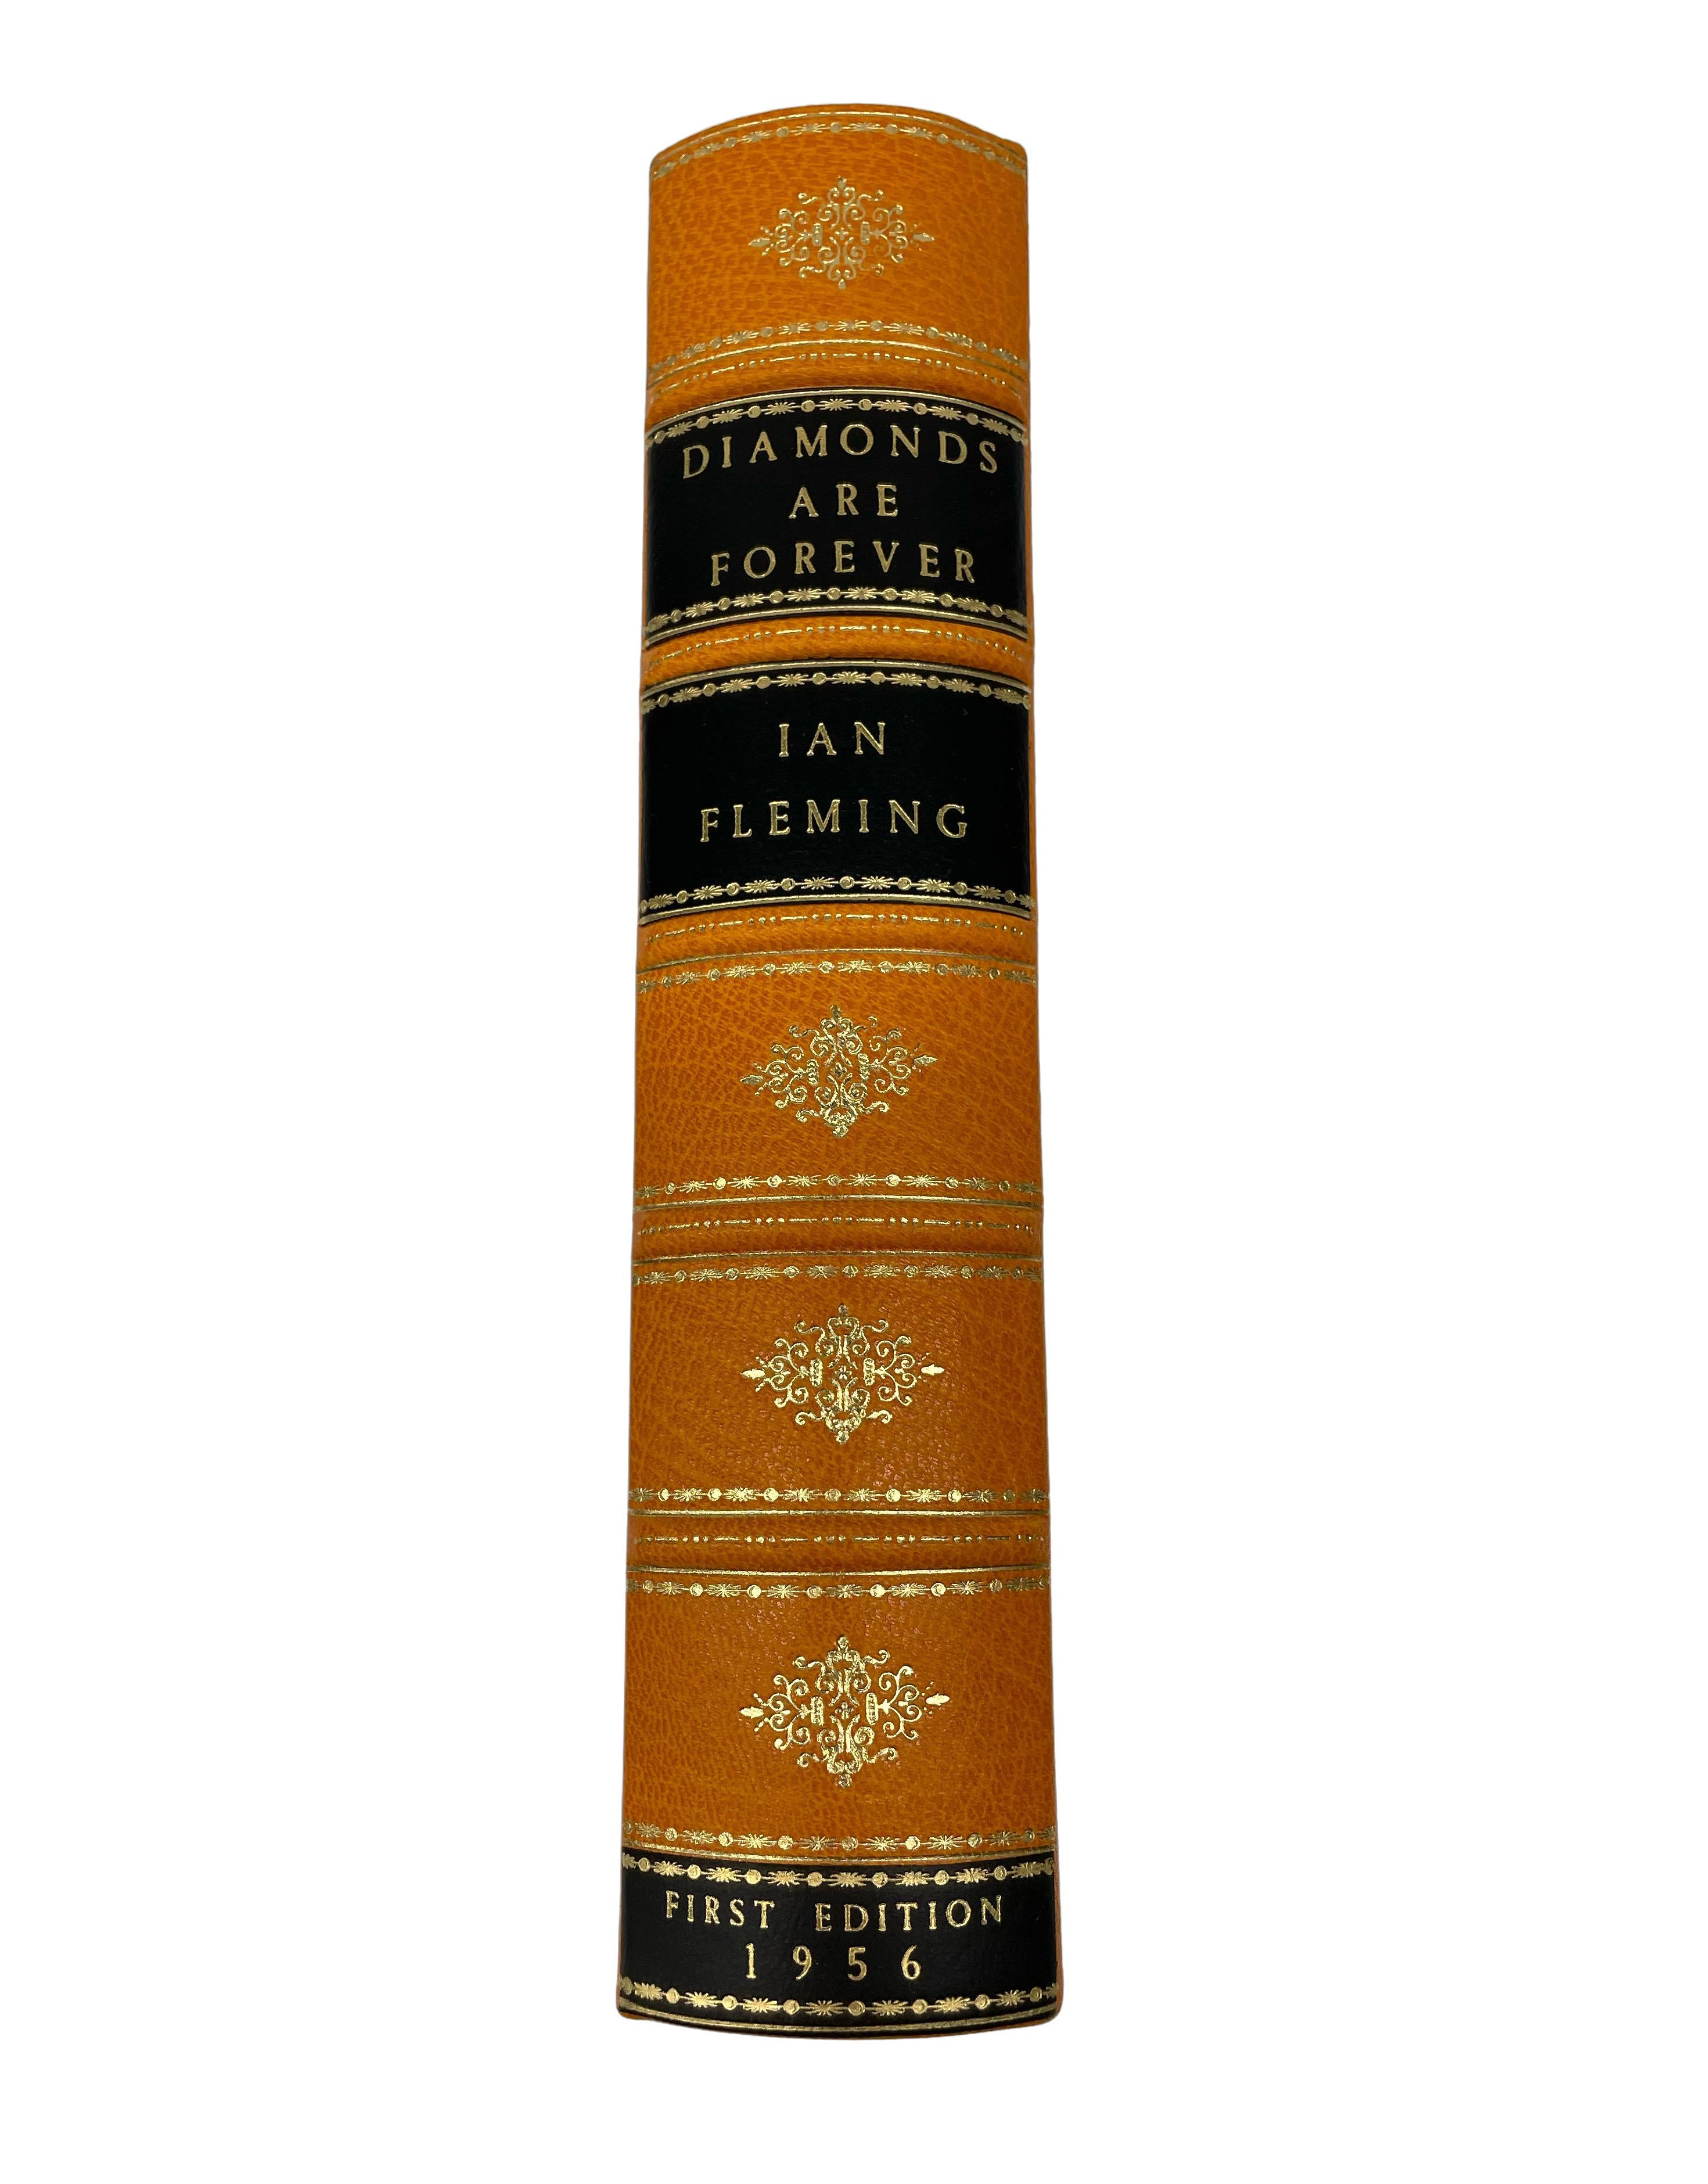 Diamonds are Forever by Ian Fleming, First Edition in Original Dust Jacket, 1956 7